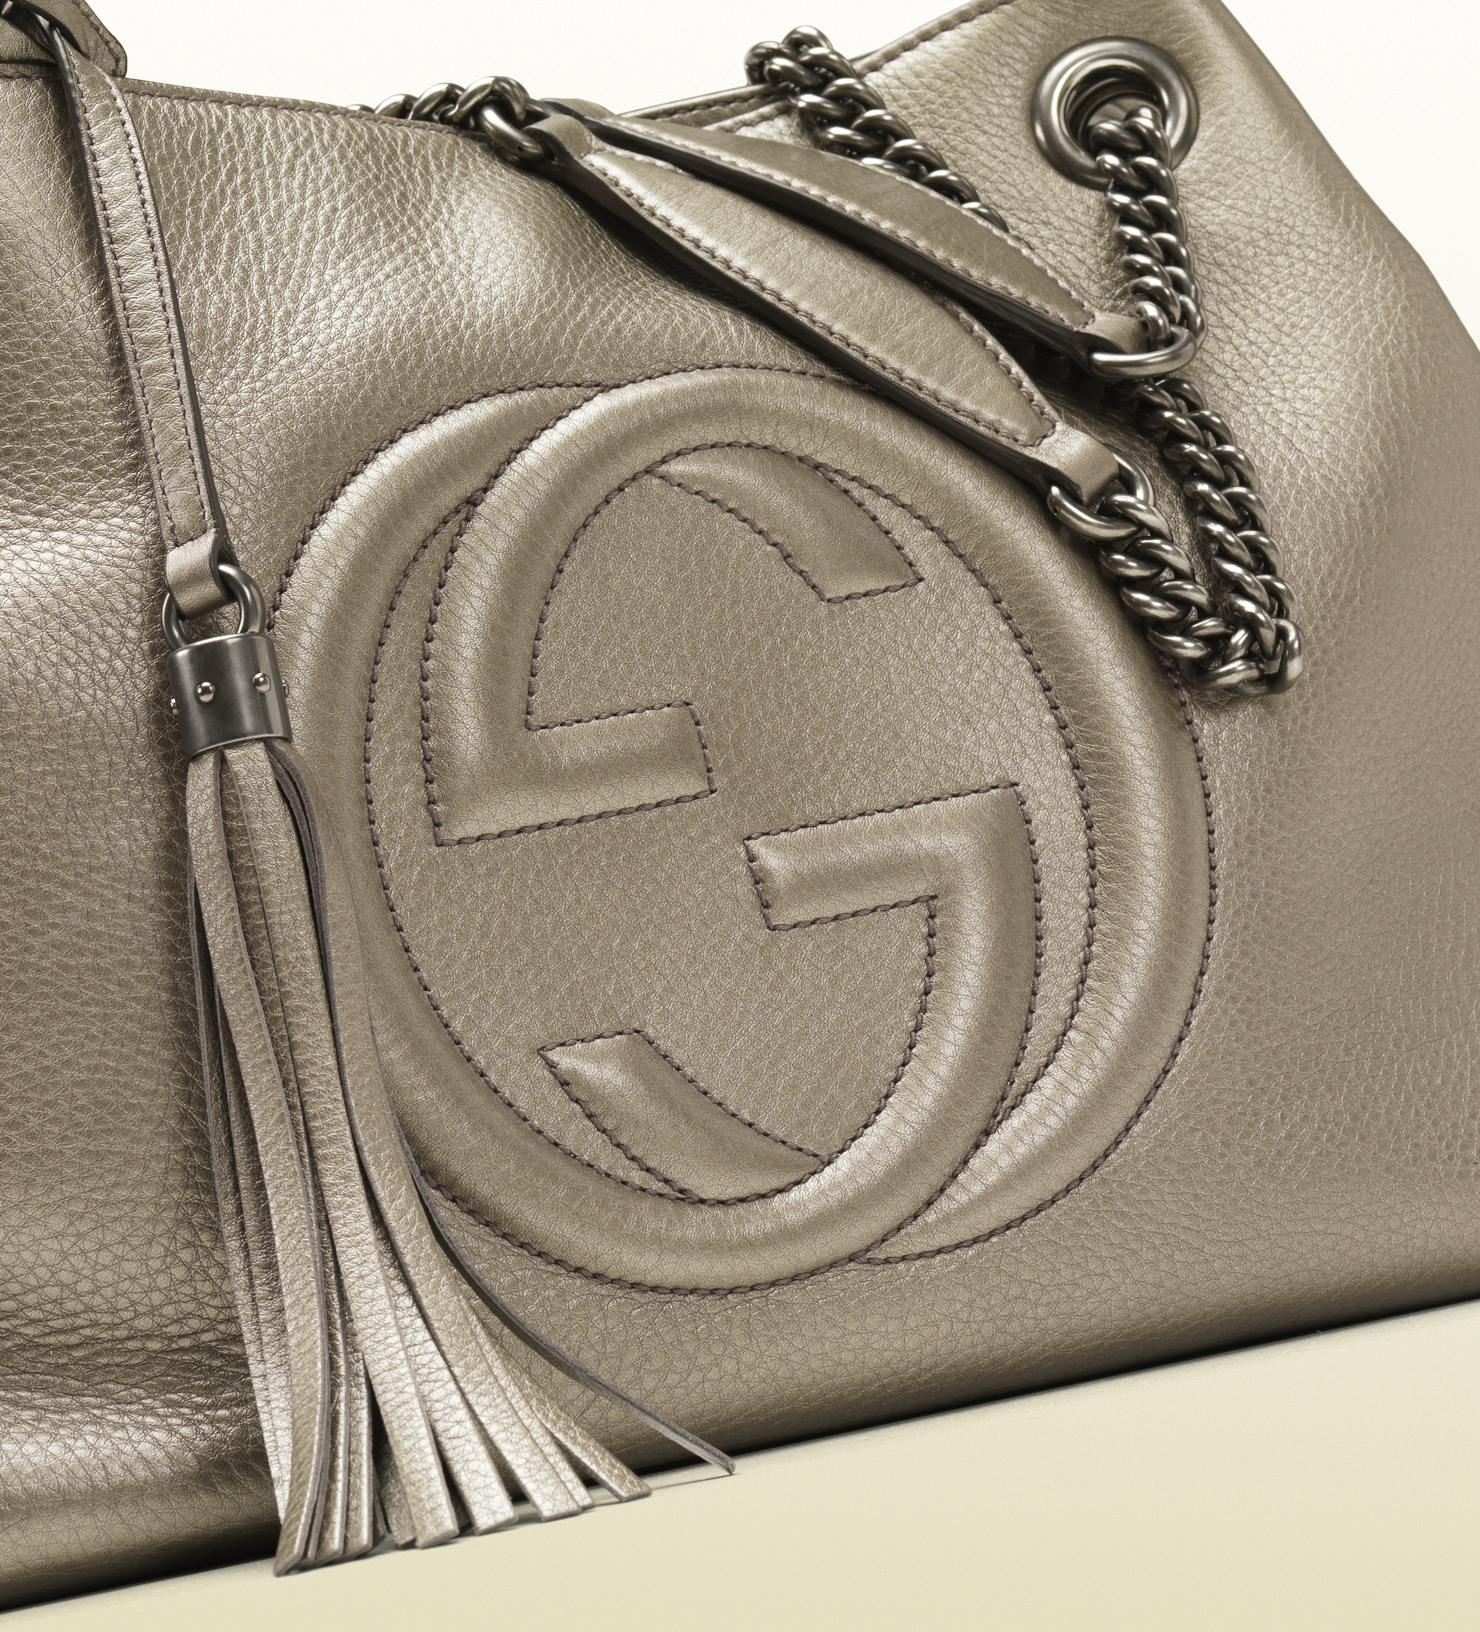 Lyst - Gucci Soho Metallic Leather Shoulder Bag in Gray